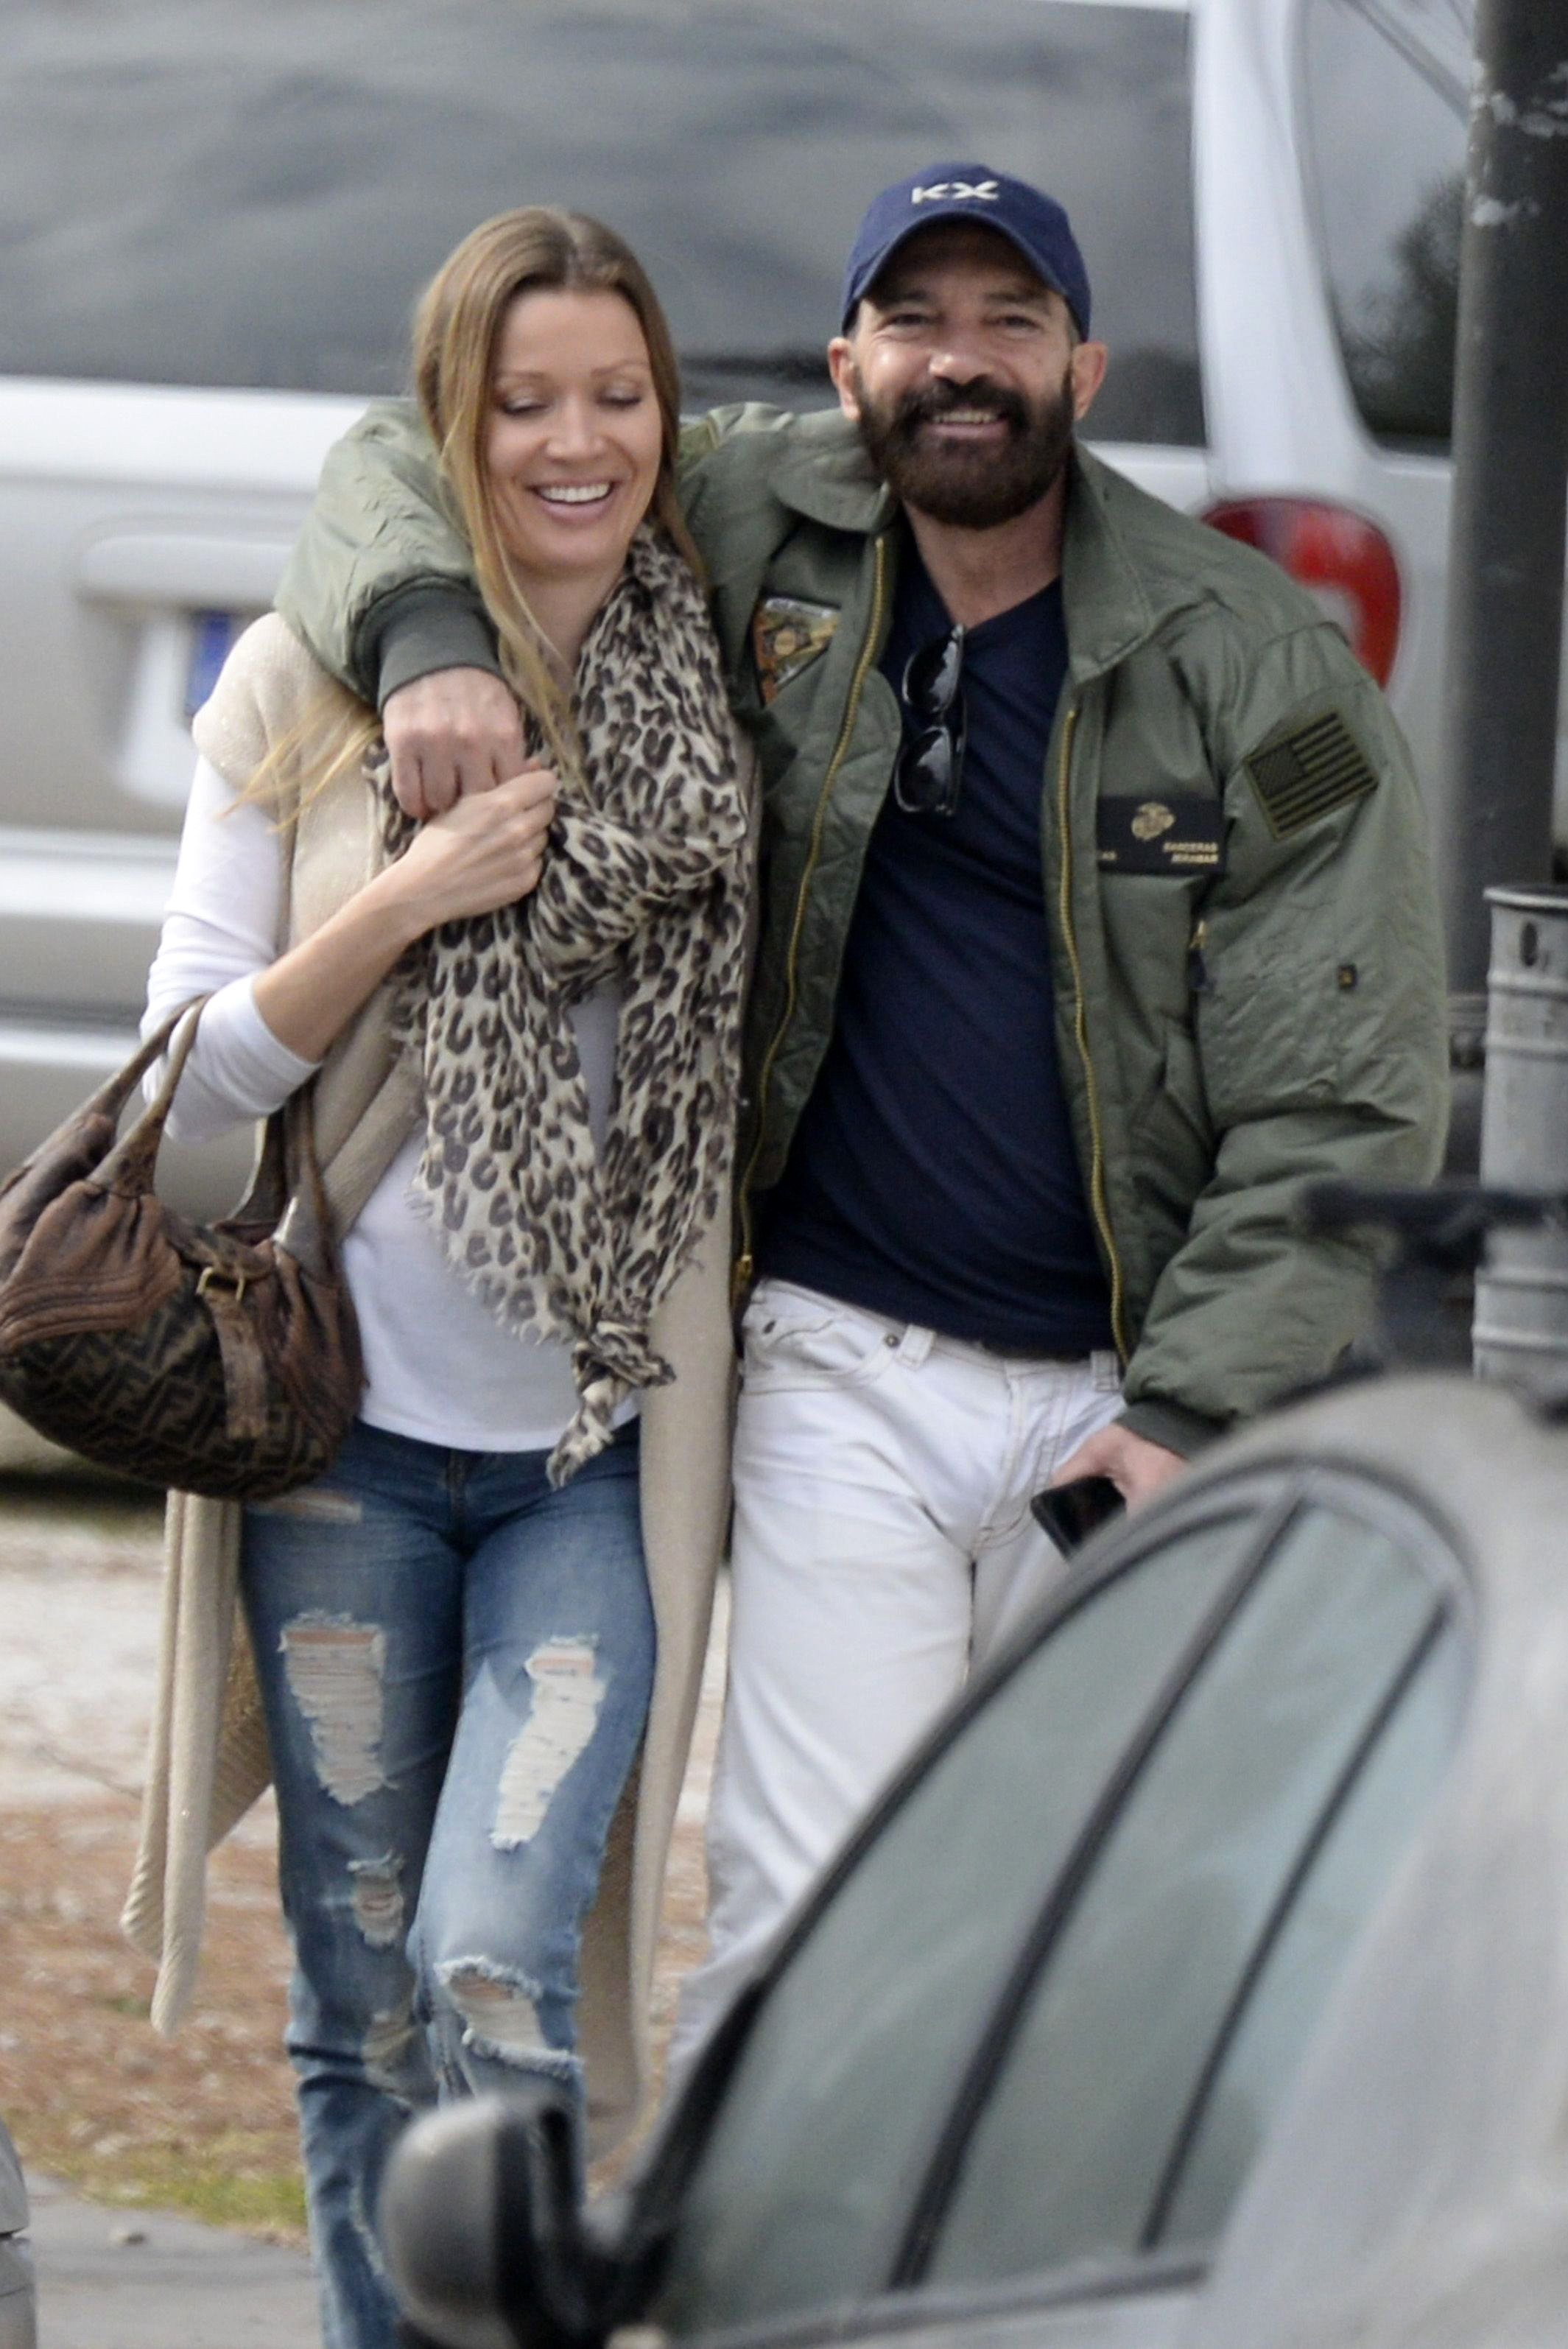 Antonio Banderas and Nicole Kimpel in Spain in 2015 | Source: Getty Images